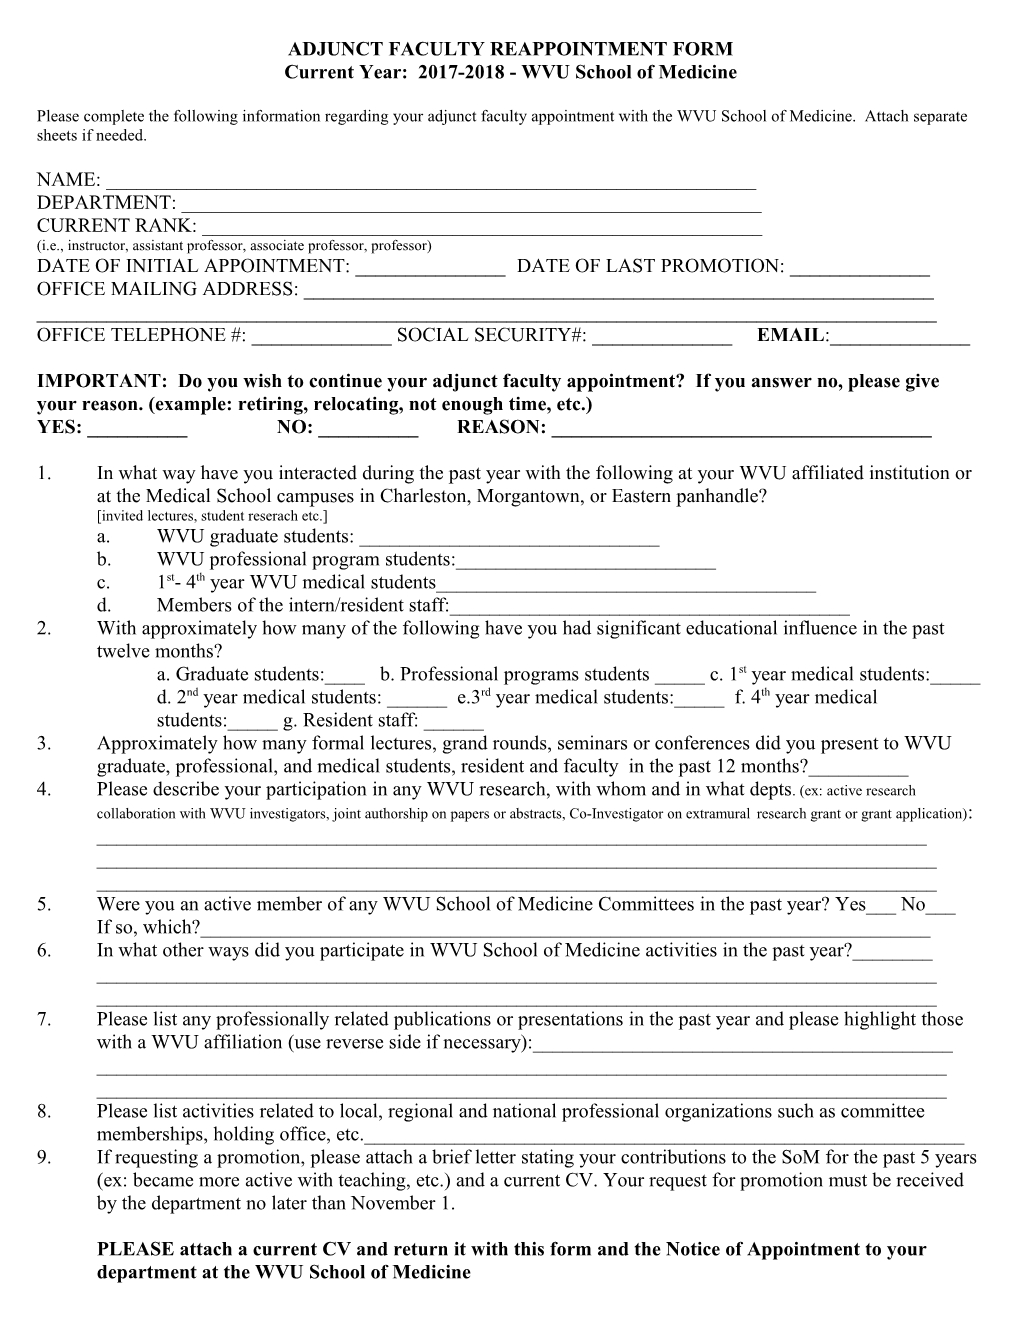 Clinical and Adjunct Faculty Reappointment Form